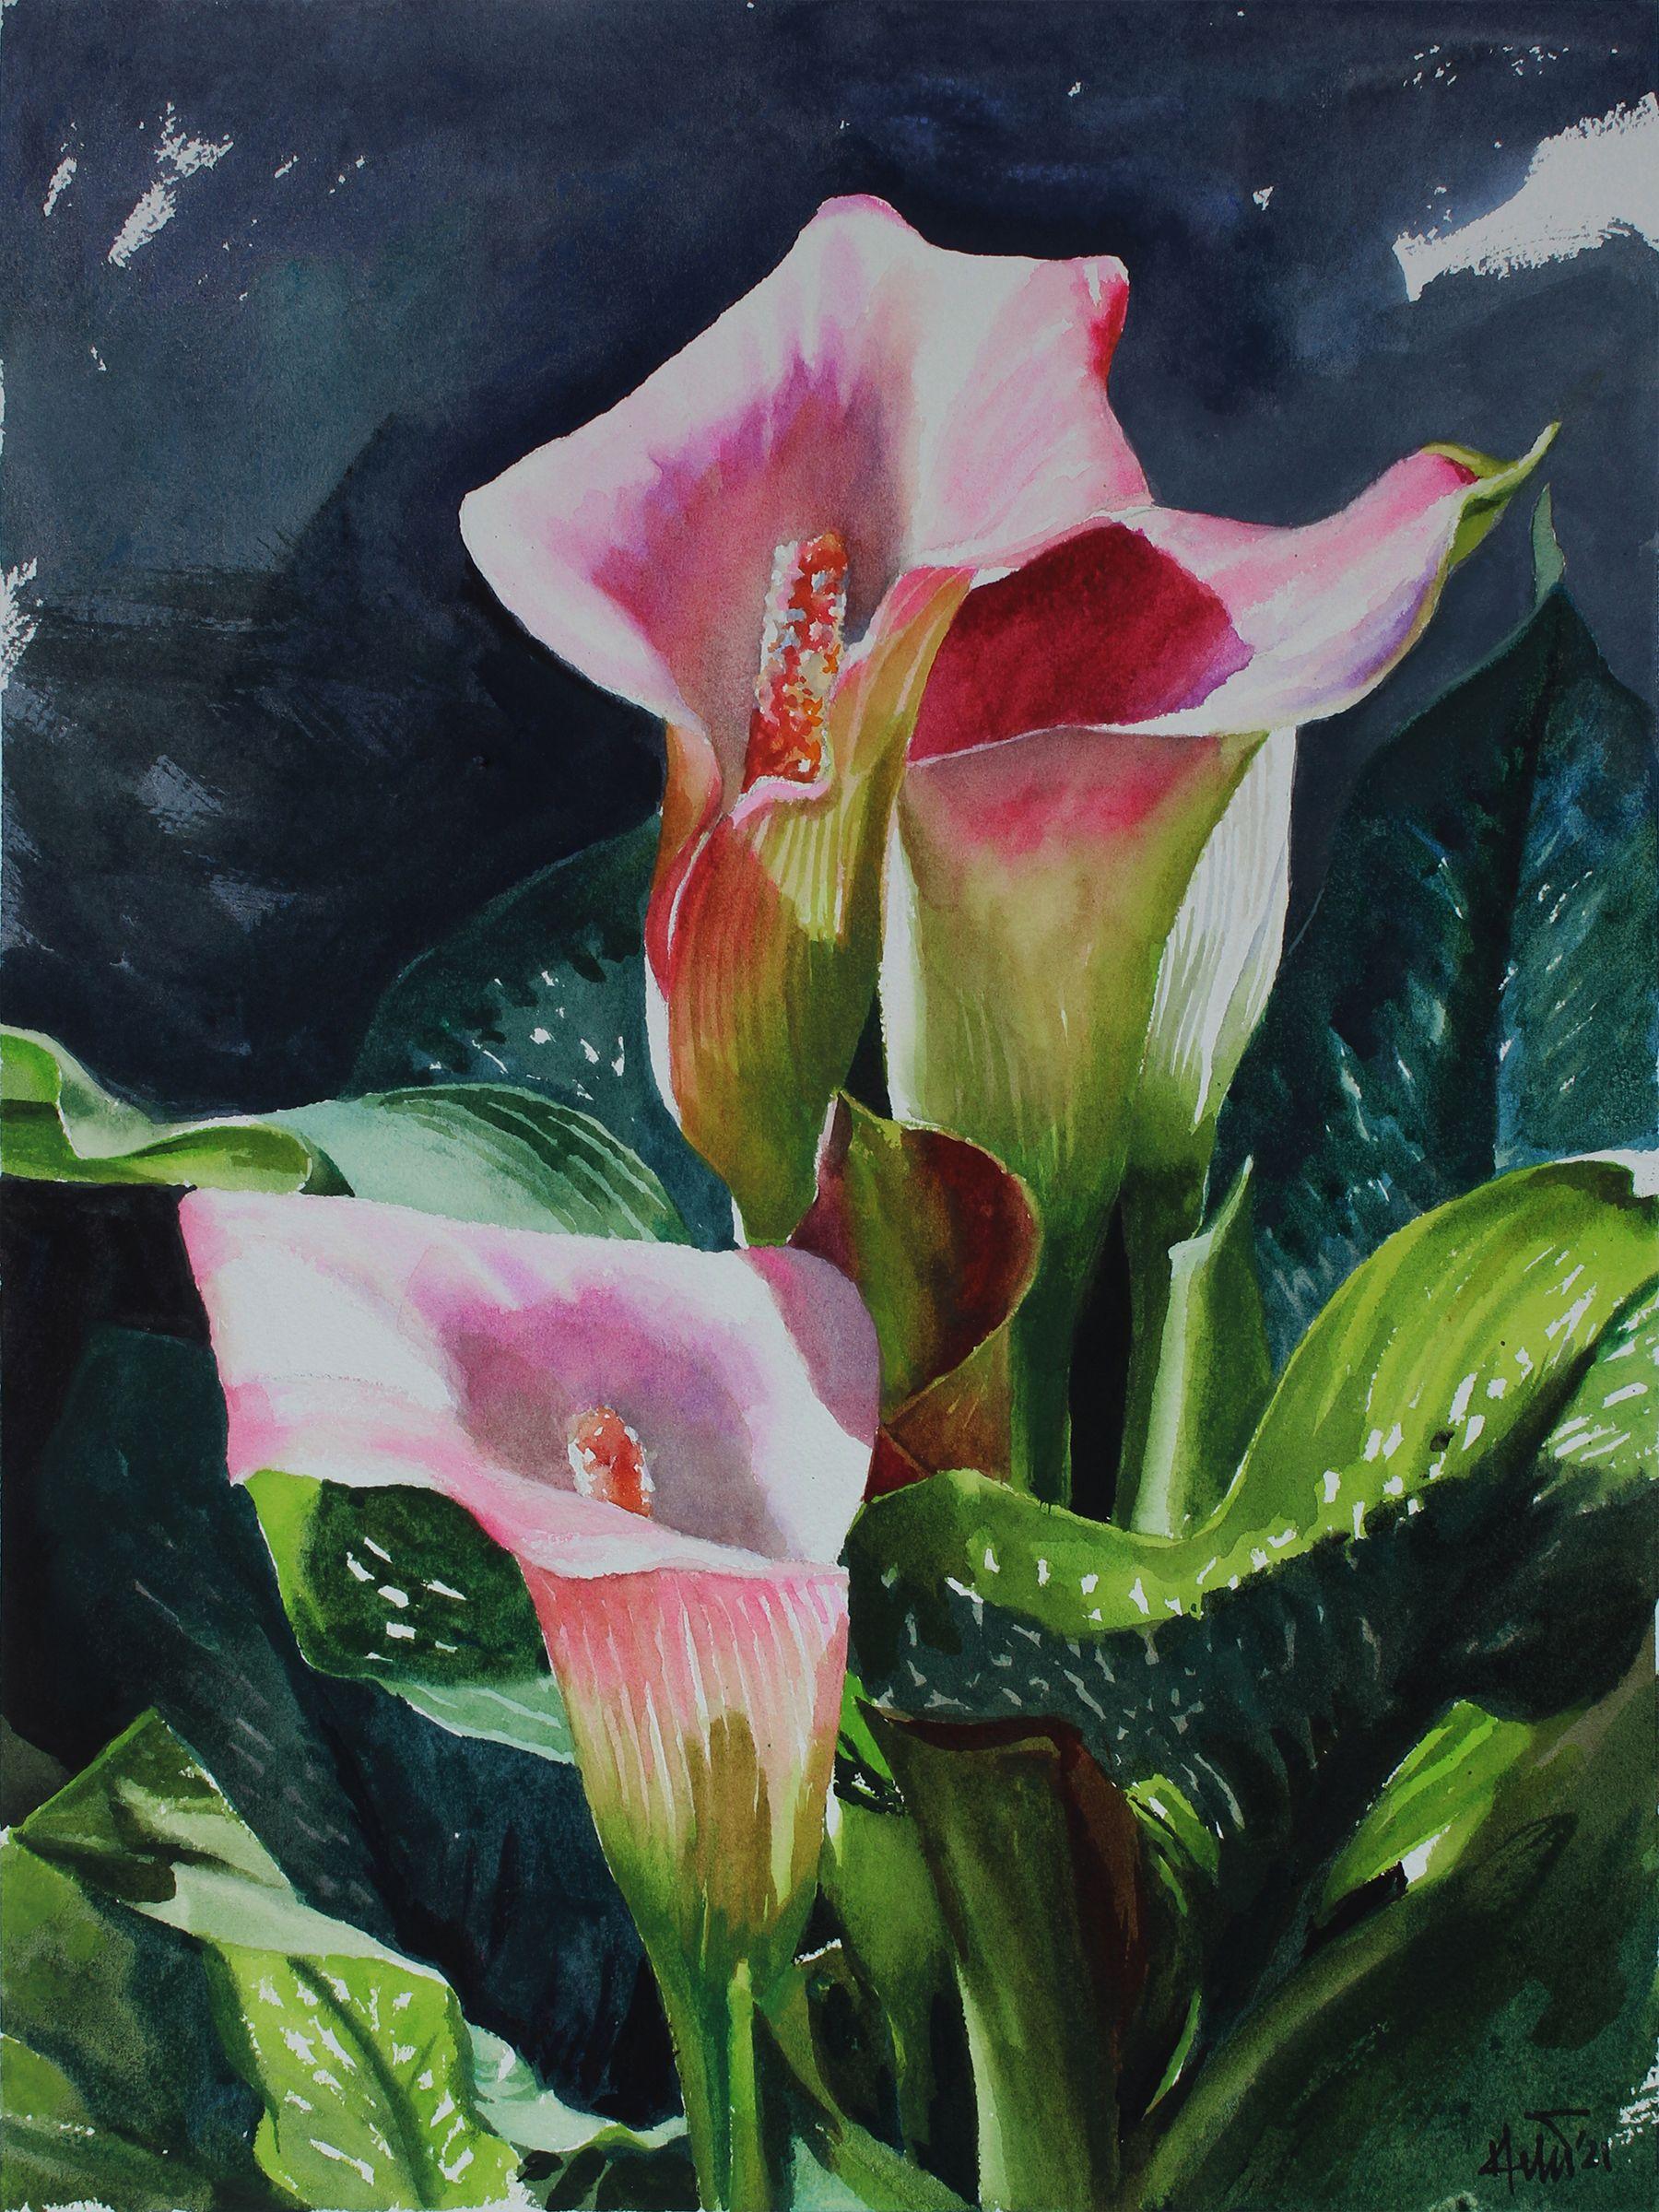 Flower Calla Lilly, Painting, Watercolor on Watercolor Paper - Art by Helal Uddin